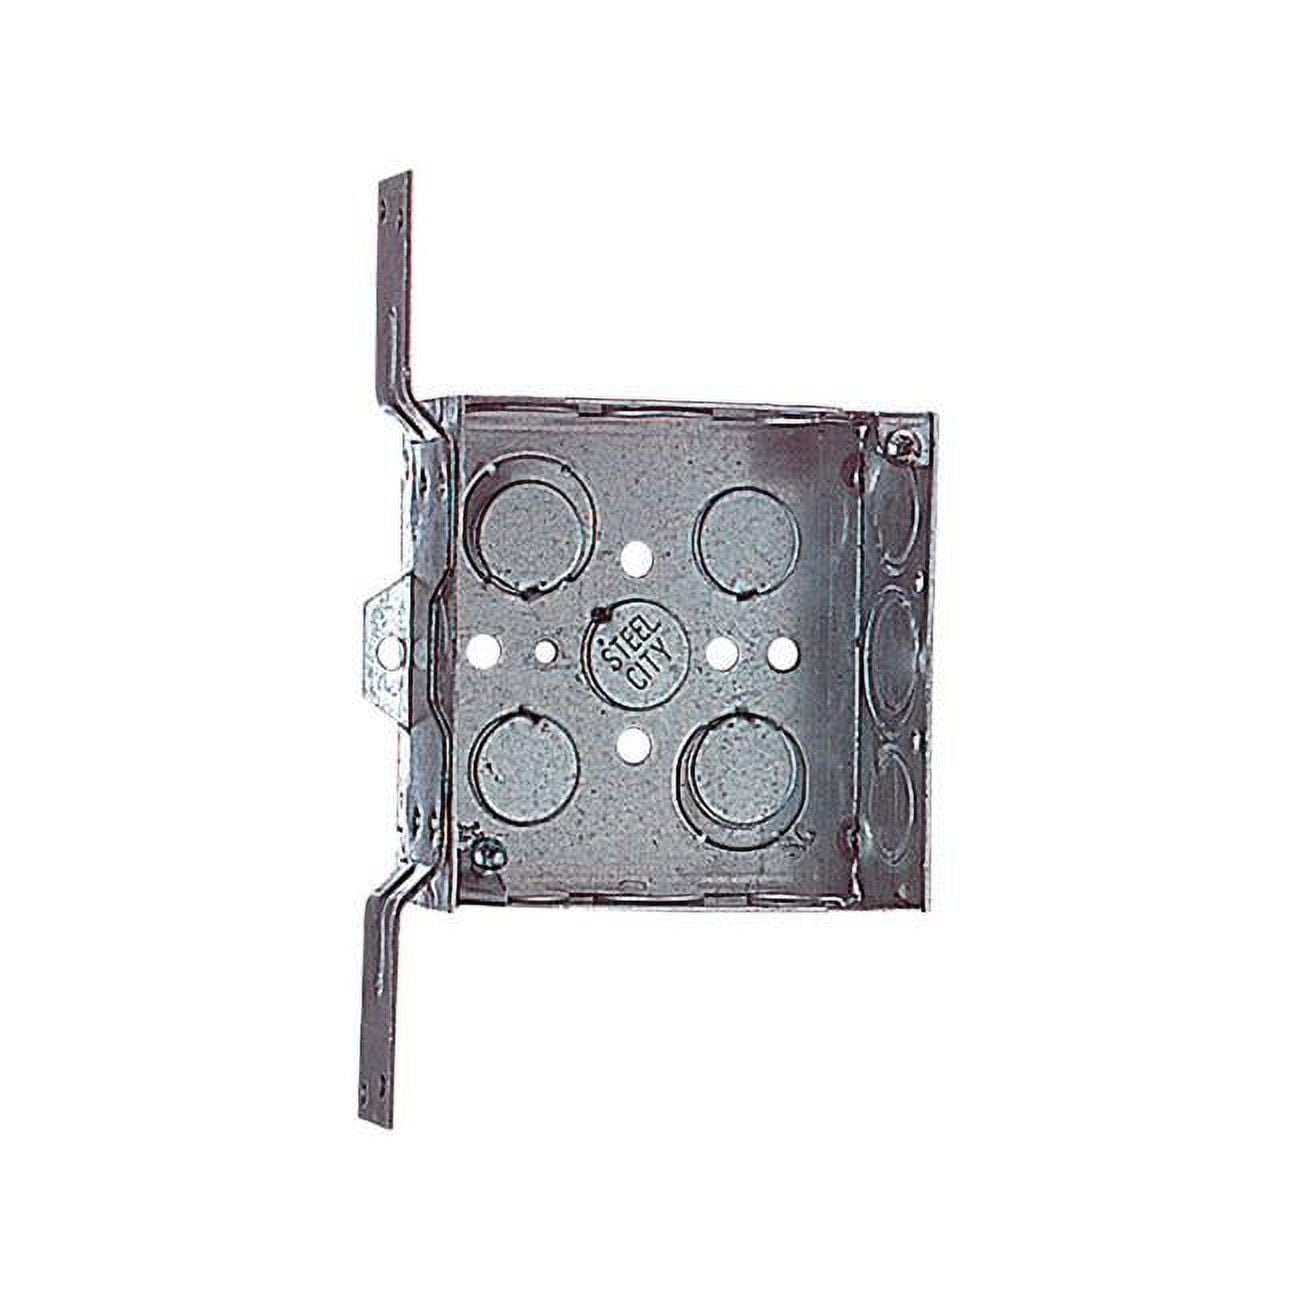 3821204 4 In. Square Steel Outlet Box, Silver